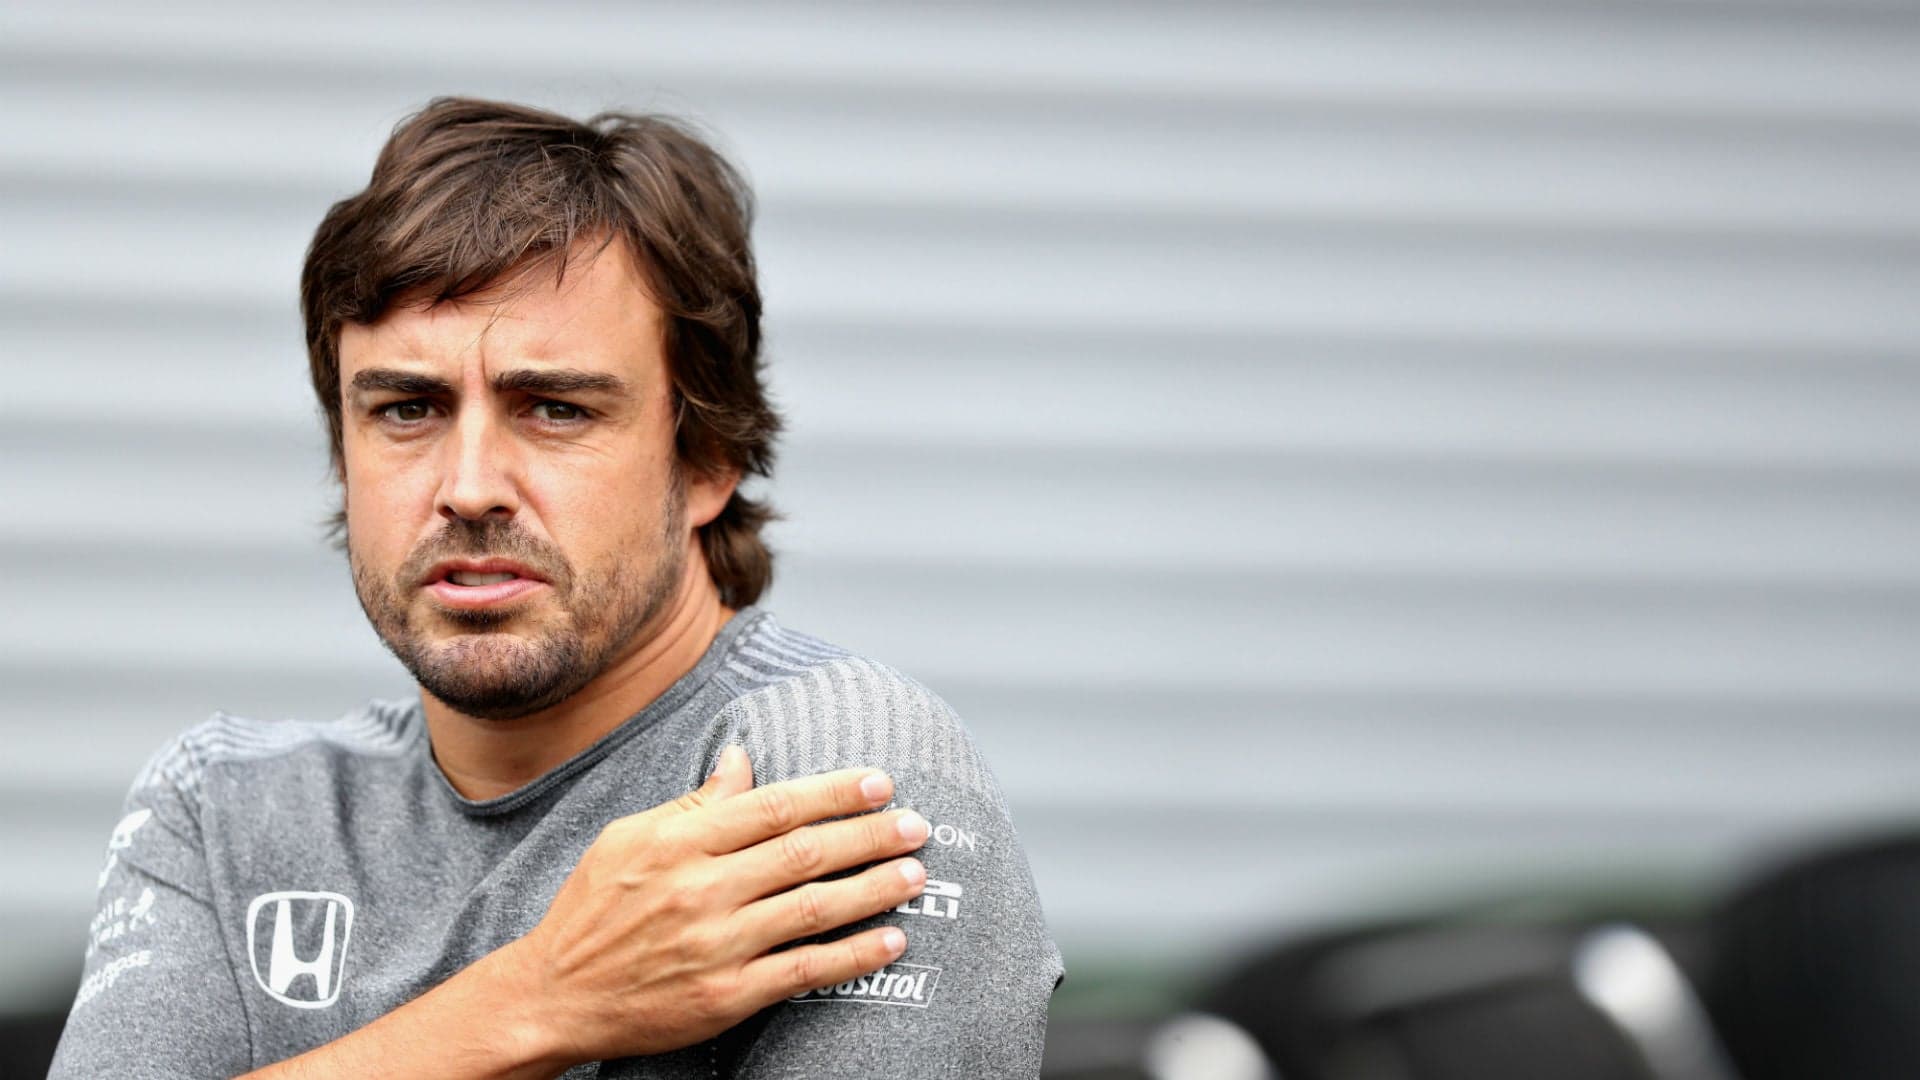 Alonso Reportedly Gives McLaren an Ultimatum: “It’s Honda or Me”